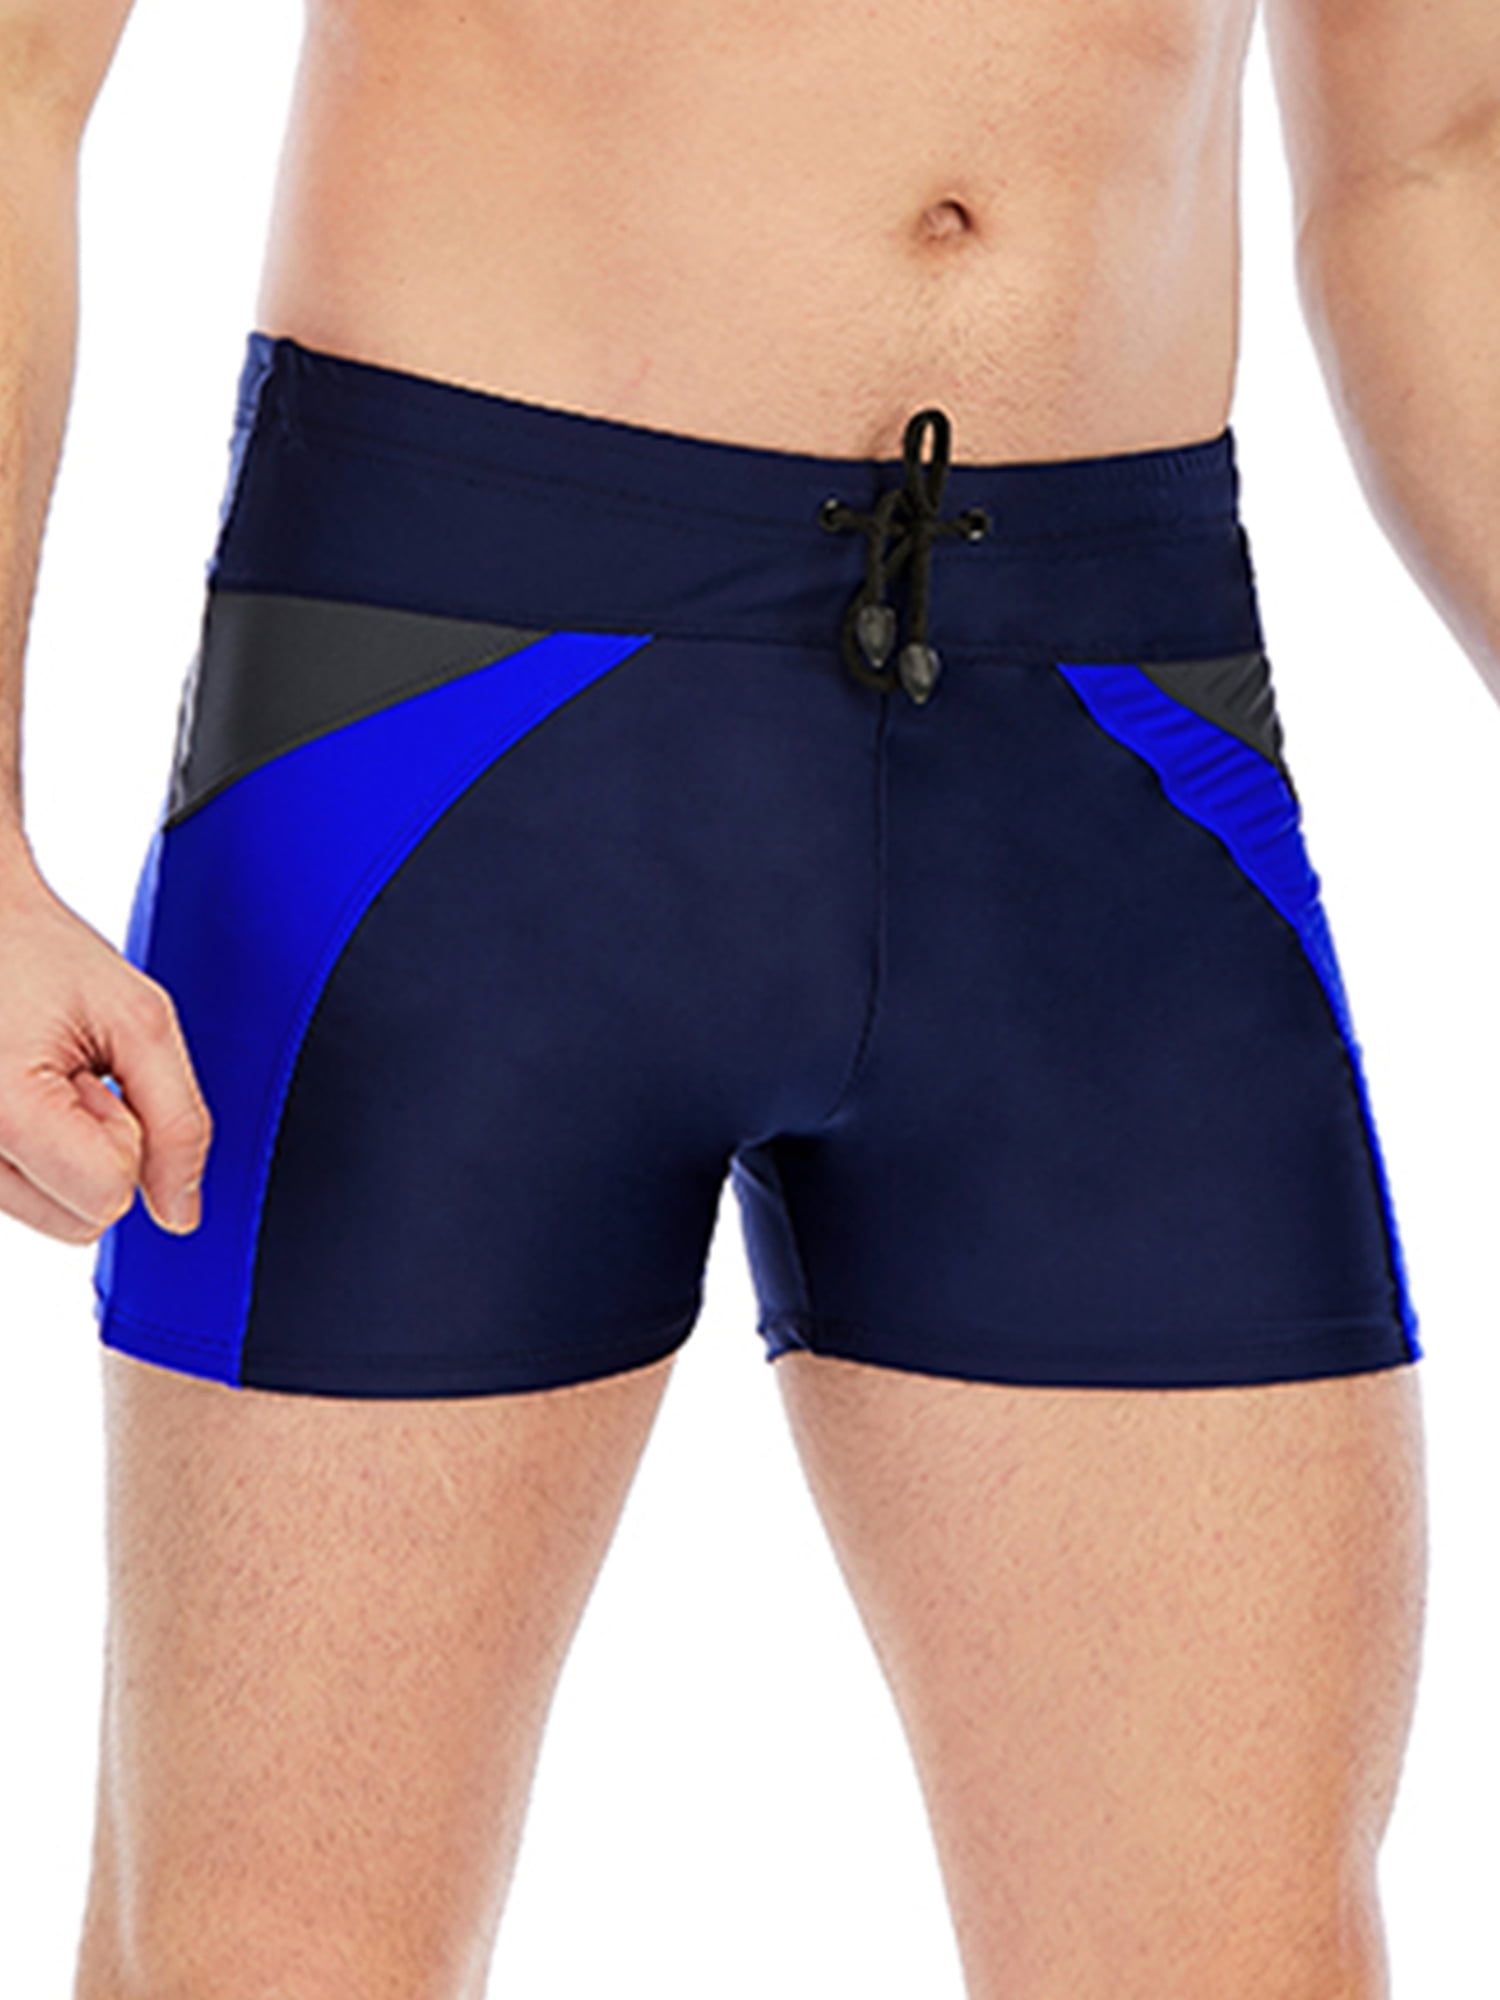 Shengding Mens Athletic Jammer Solid Sport Jammer Quick Drying Shorts Swimsuit Swimming Trunks for Competition